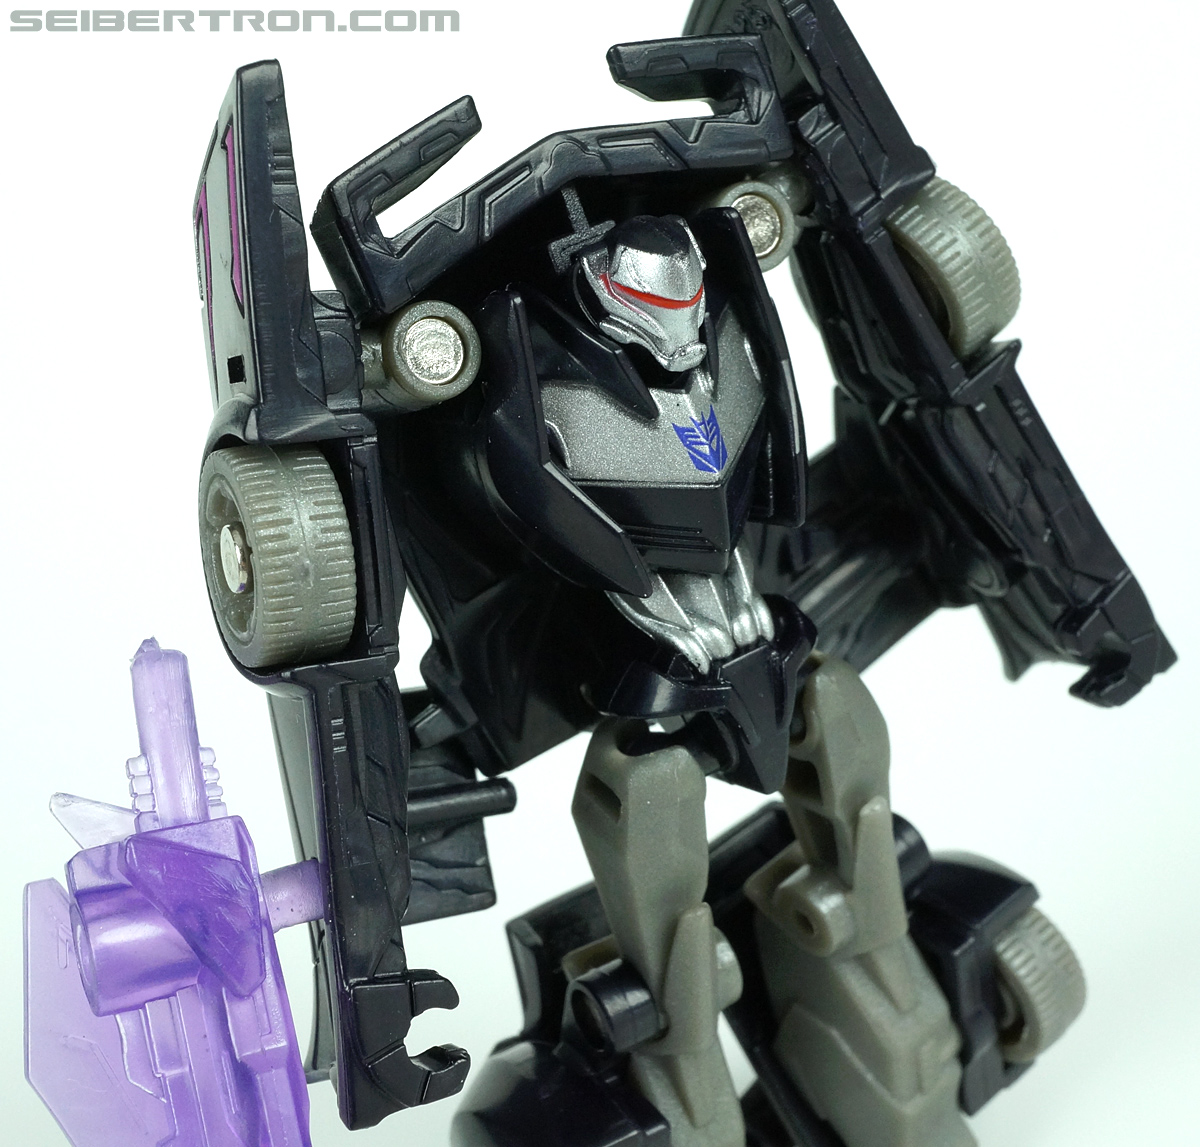 Transformers Prime: Cyberverse Vehicon (Image #66 of 128)